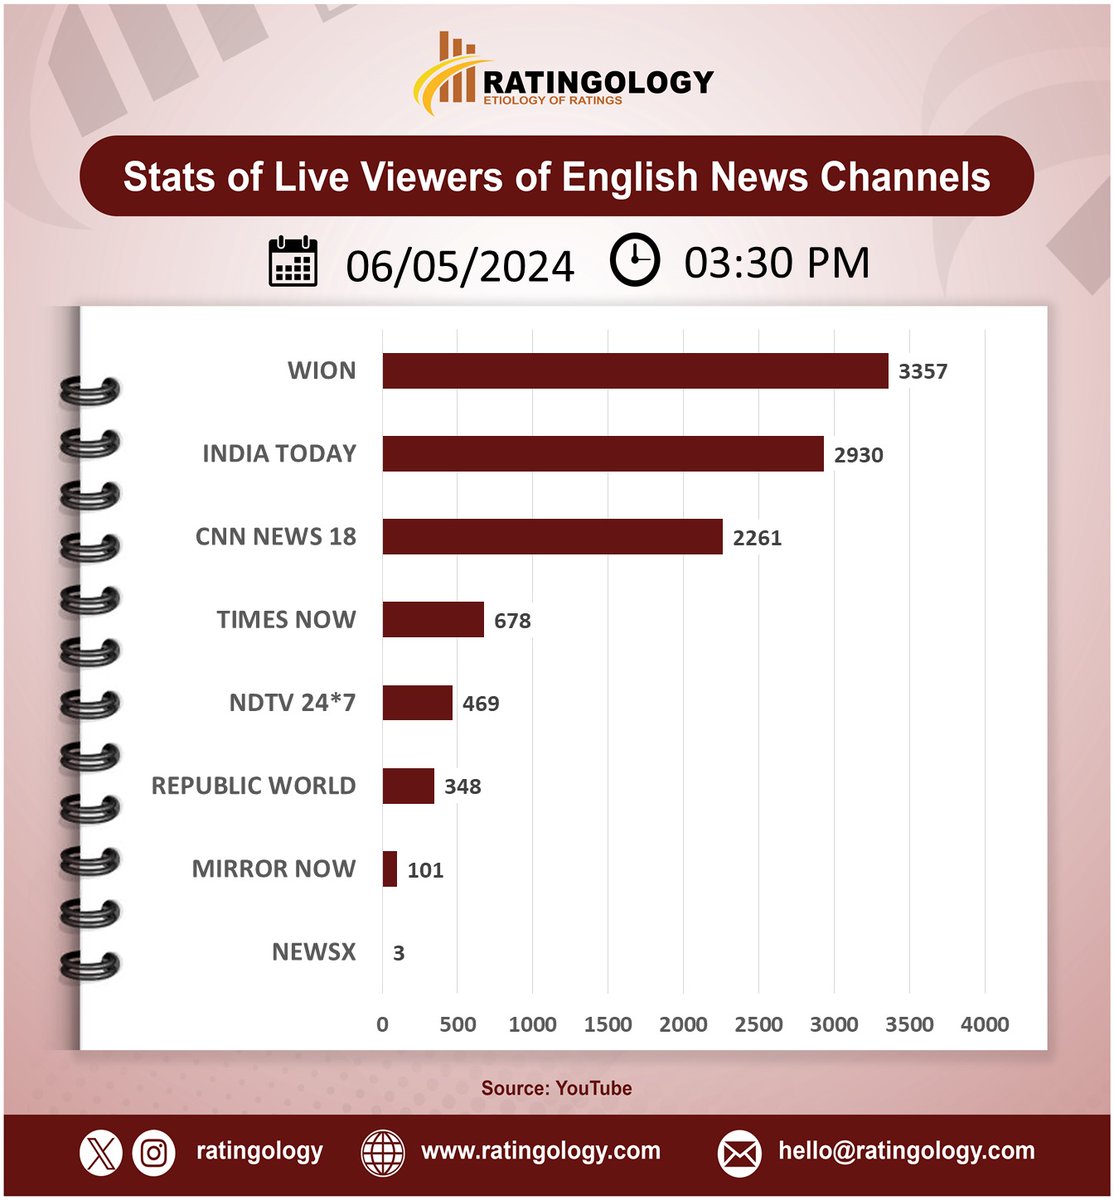 𝐒𝐭𝐚𝐭𝐬 𝐨𝐟 𝐥𝐢𝐯𝐞 𝐯𝐢𝐞𝐰𝐞𝐫𝐬 𝐨𝐧 #Youtube of #EnglishMedia #channelsat 03:30pm, Date: 06/May/2024 #Ratingology #Mediastats #RatingsKaBaap #DataScience #IndiaToday #Wion #RepublicTV #CNNNews18 #TimesNow #NewsX #NDTV24x7 #MirrorNow